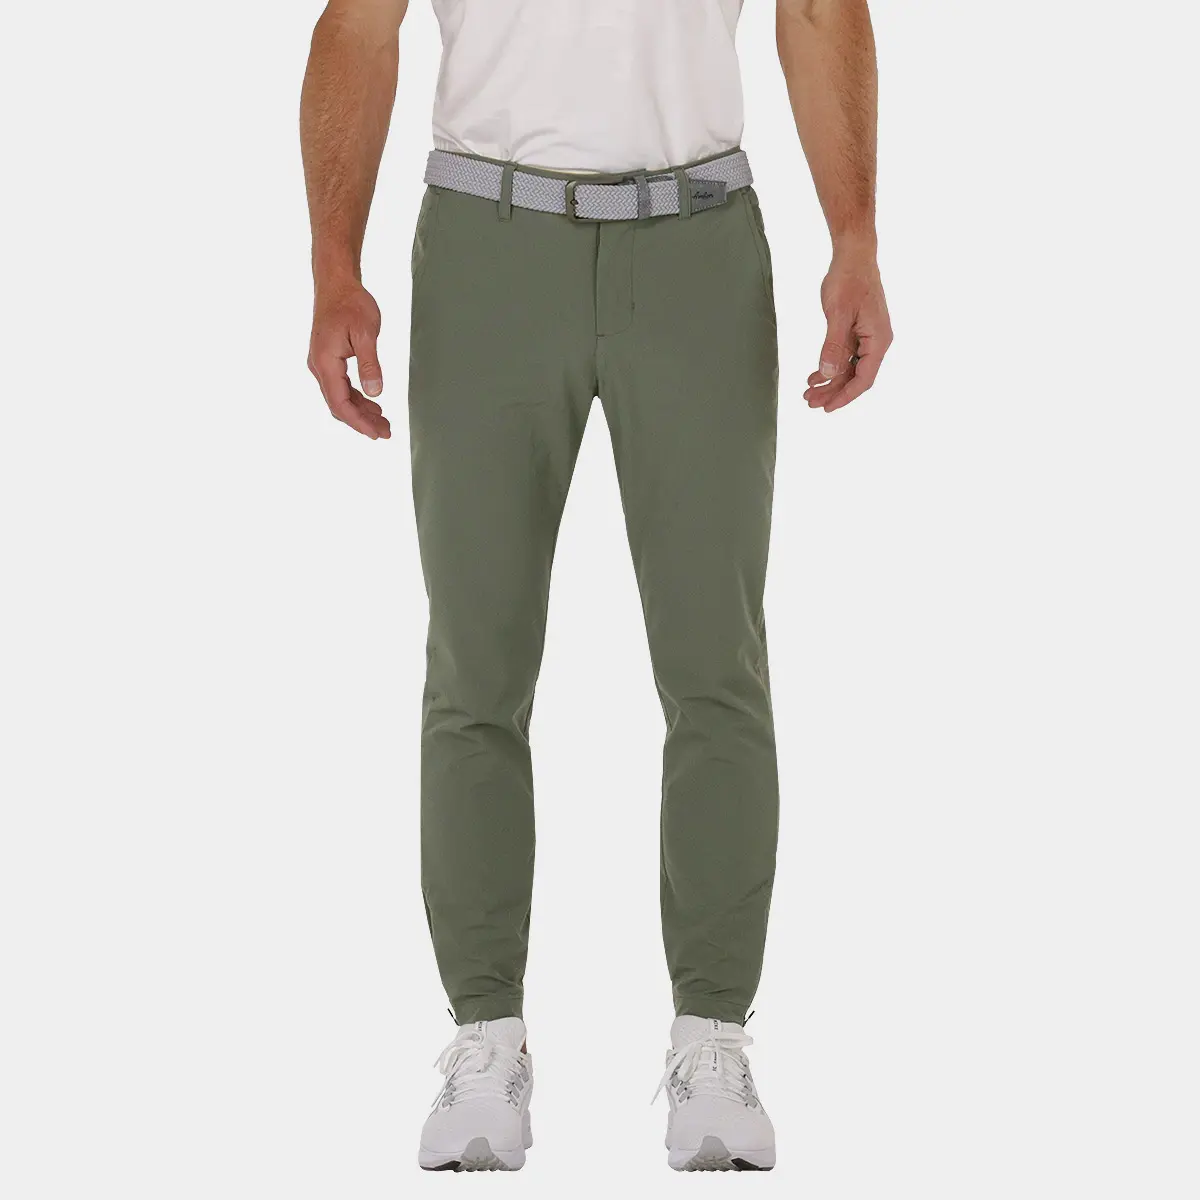 Shop Men's Golf Joggers: The Avalon Tour Jogger in Sage Green